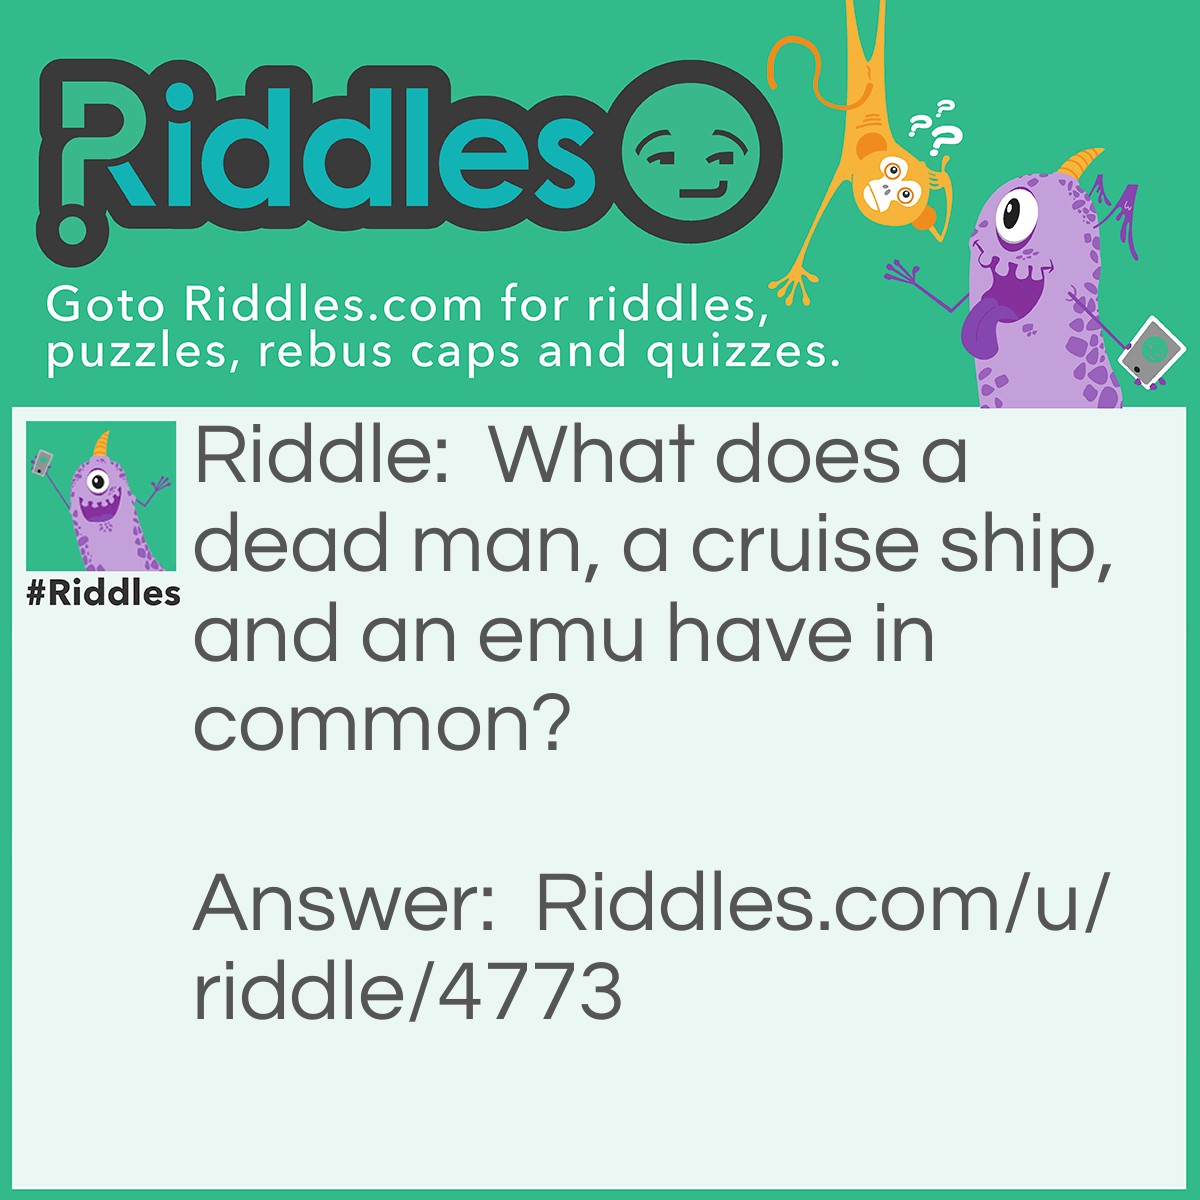 Riddle: What does a dead man, a cruise ship, and an emu have in common? Answer: Nothing.